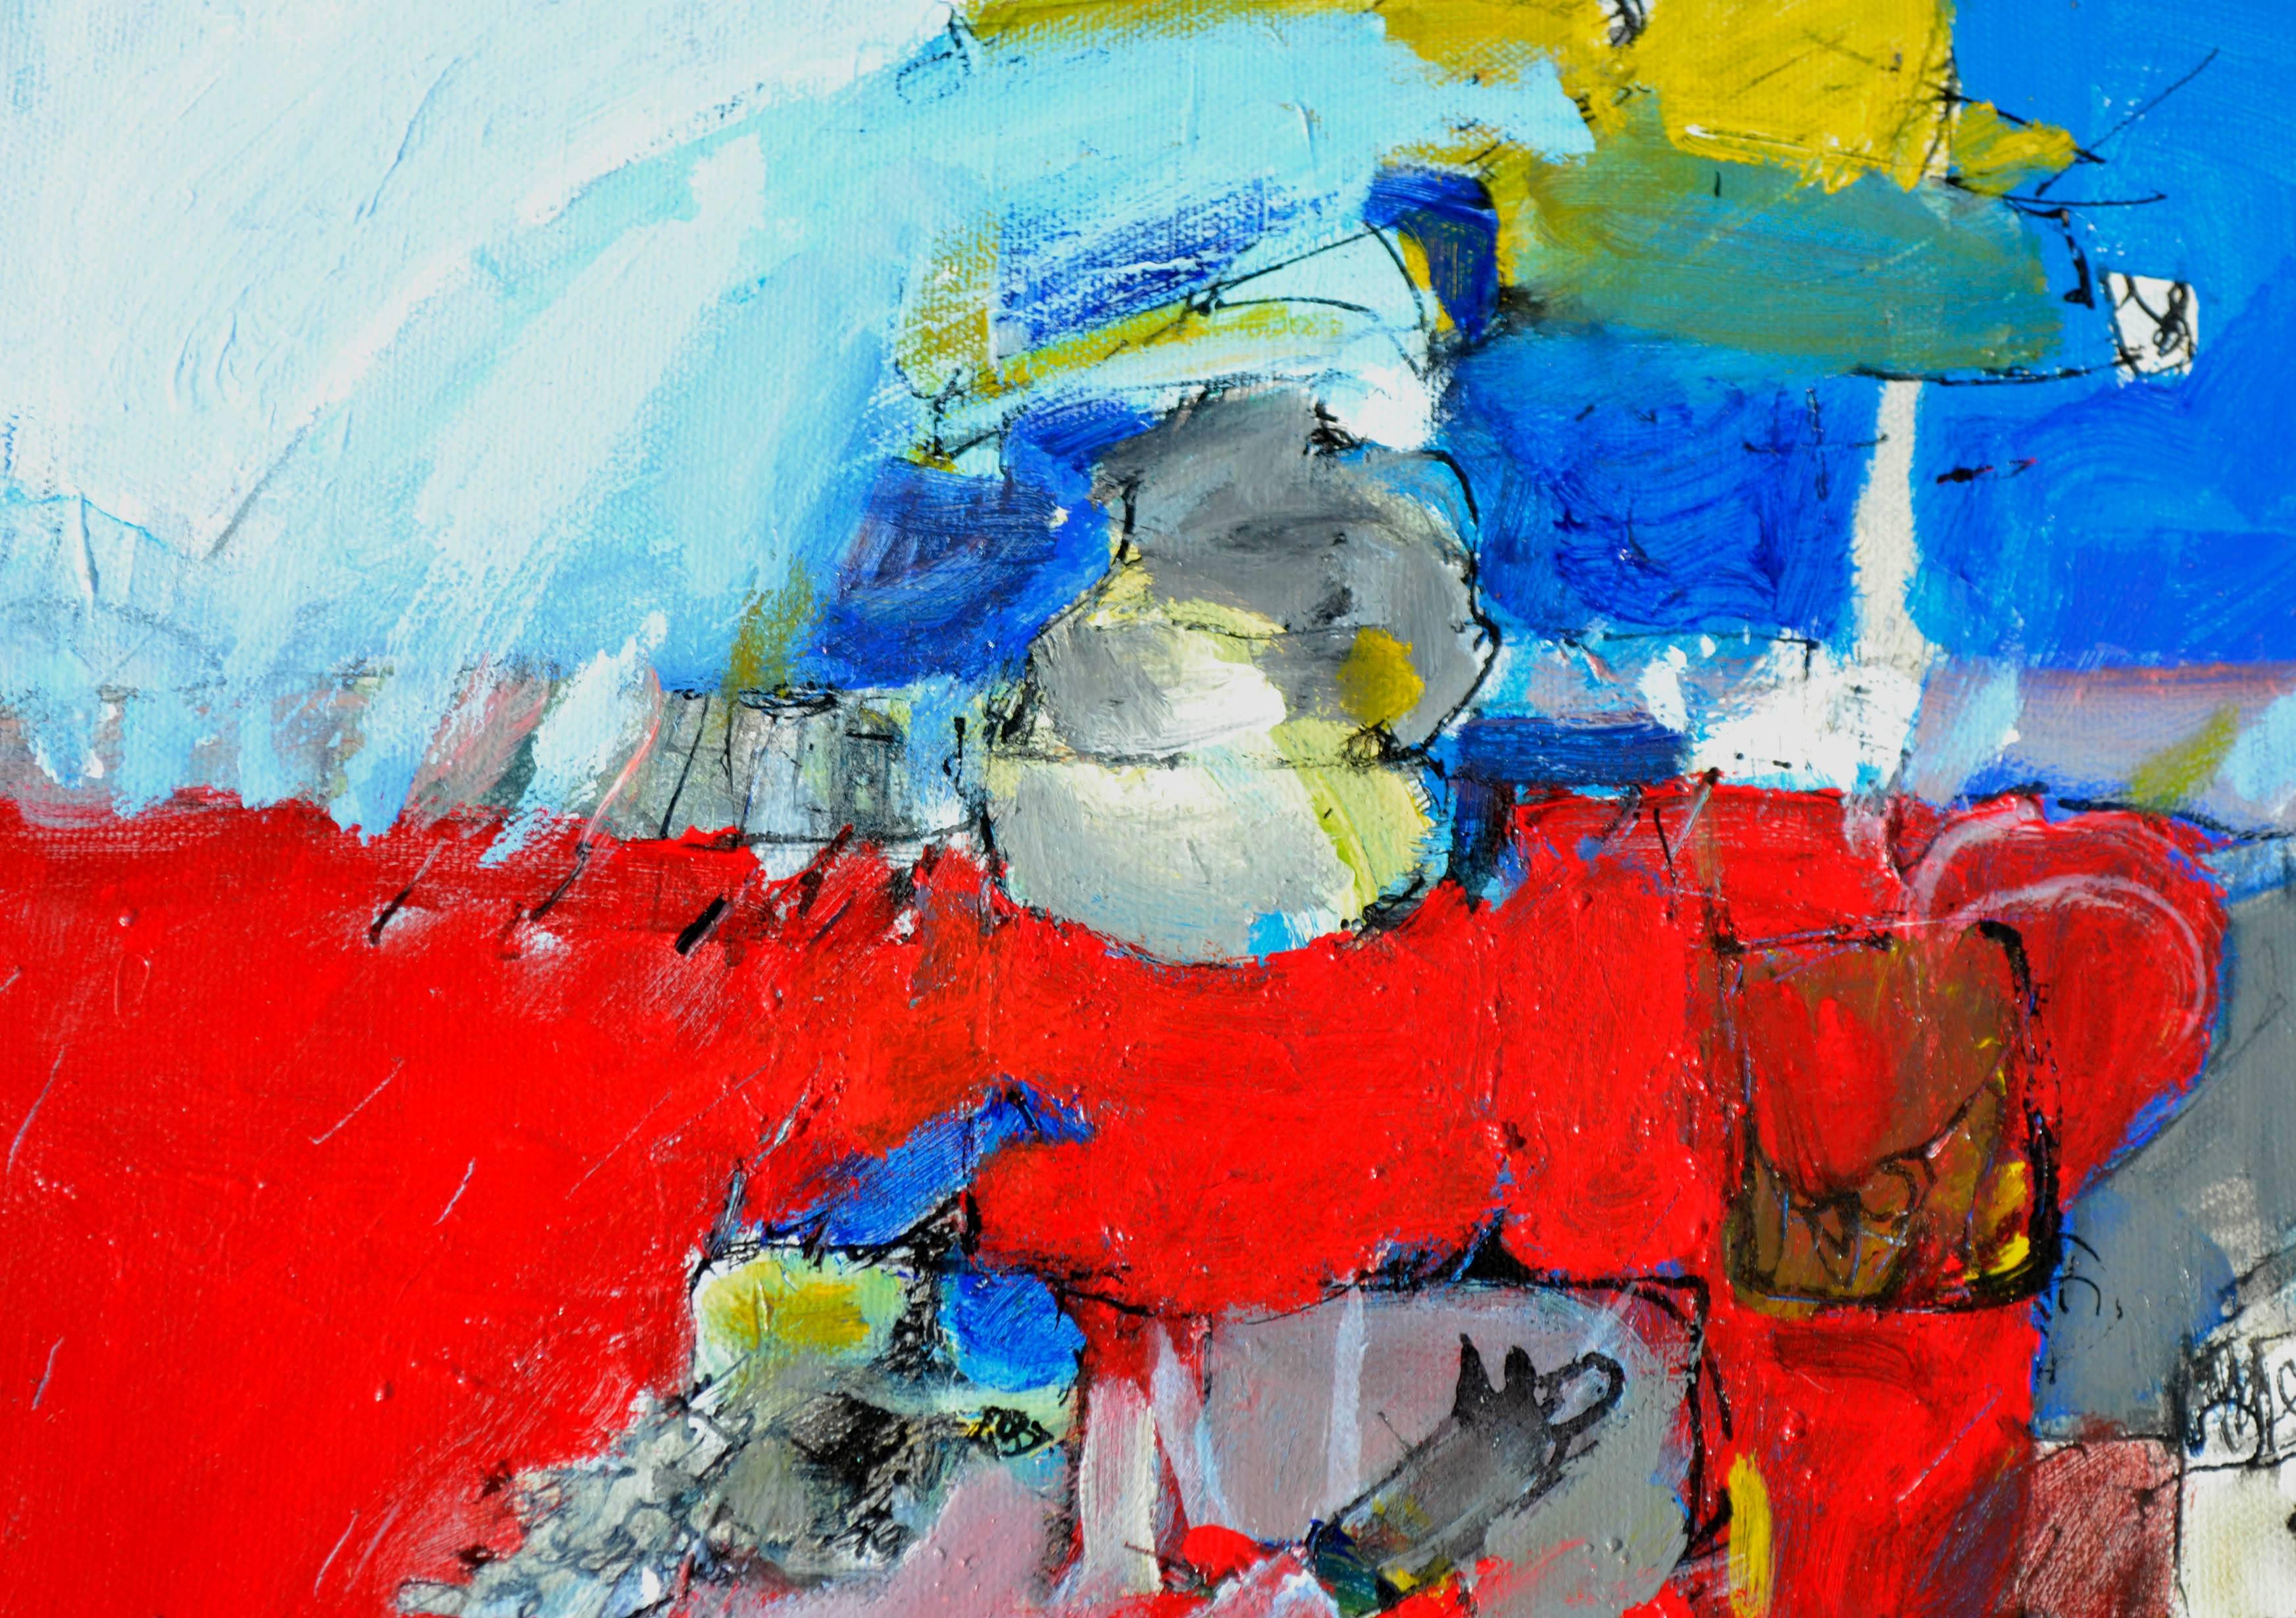 Fetishes, Abstract in Red, Blue and Yellow - Abstract Expressionist Painting by Francisco Ruiz del Porto